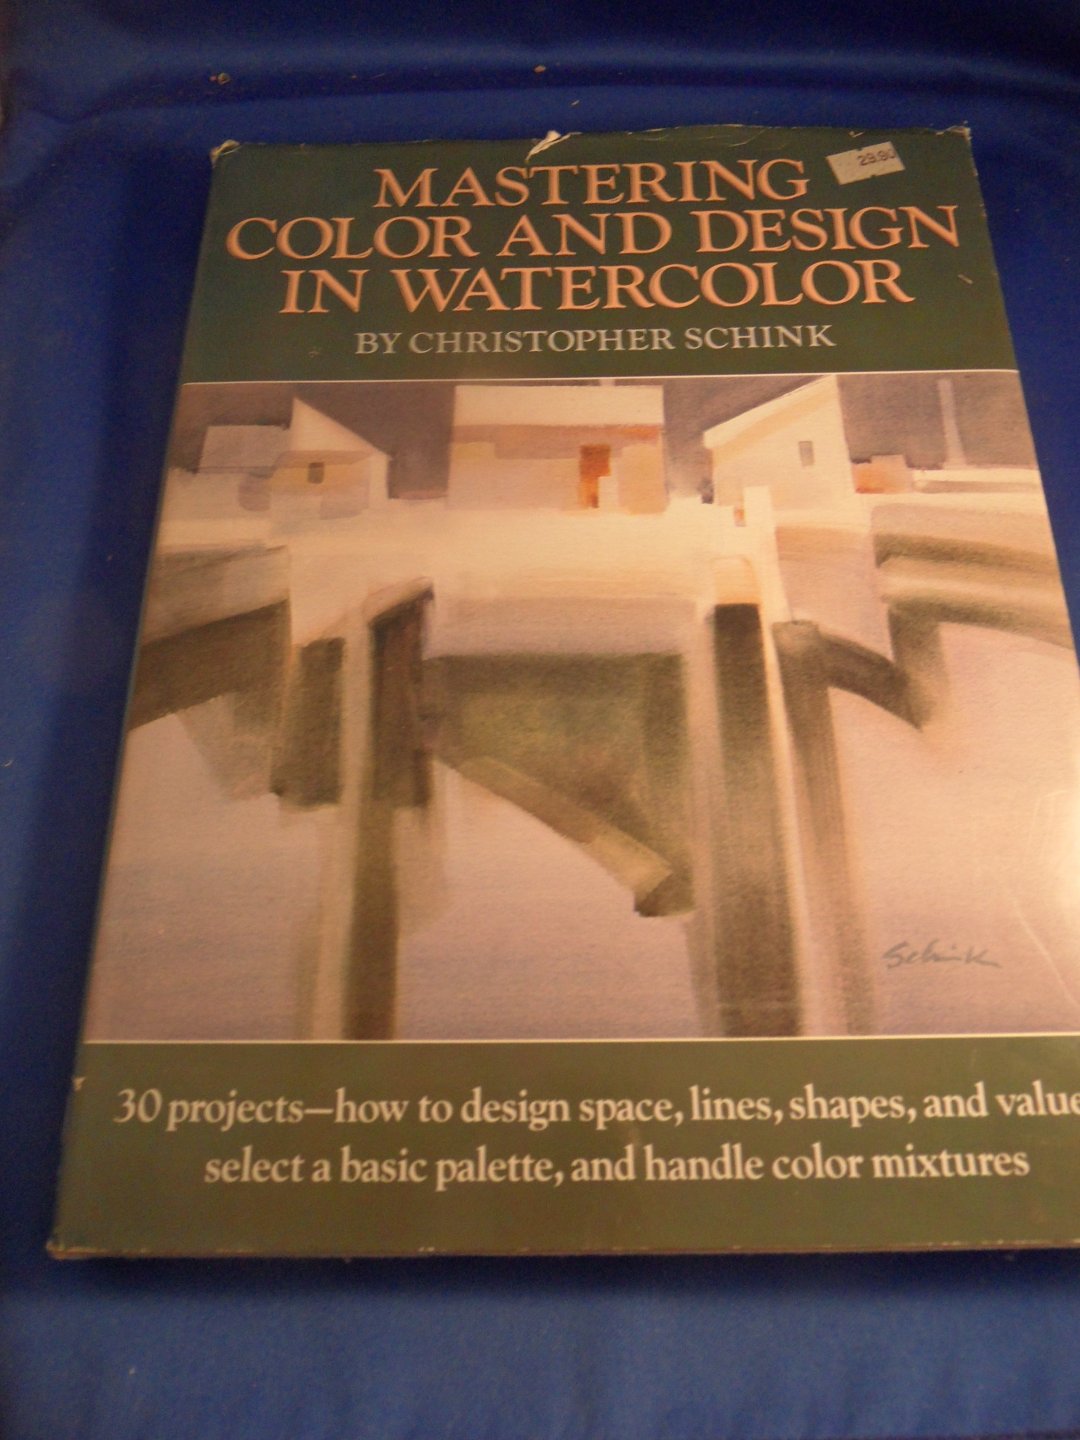 Schink, Christopher - Mastering color and design in watercolor. 30 projects, how to design space, lines, shapes and values select a basic palette, and handle color mixtures